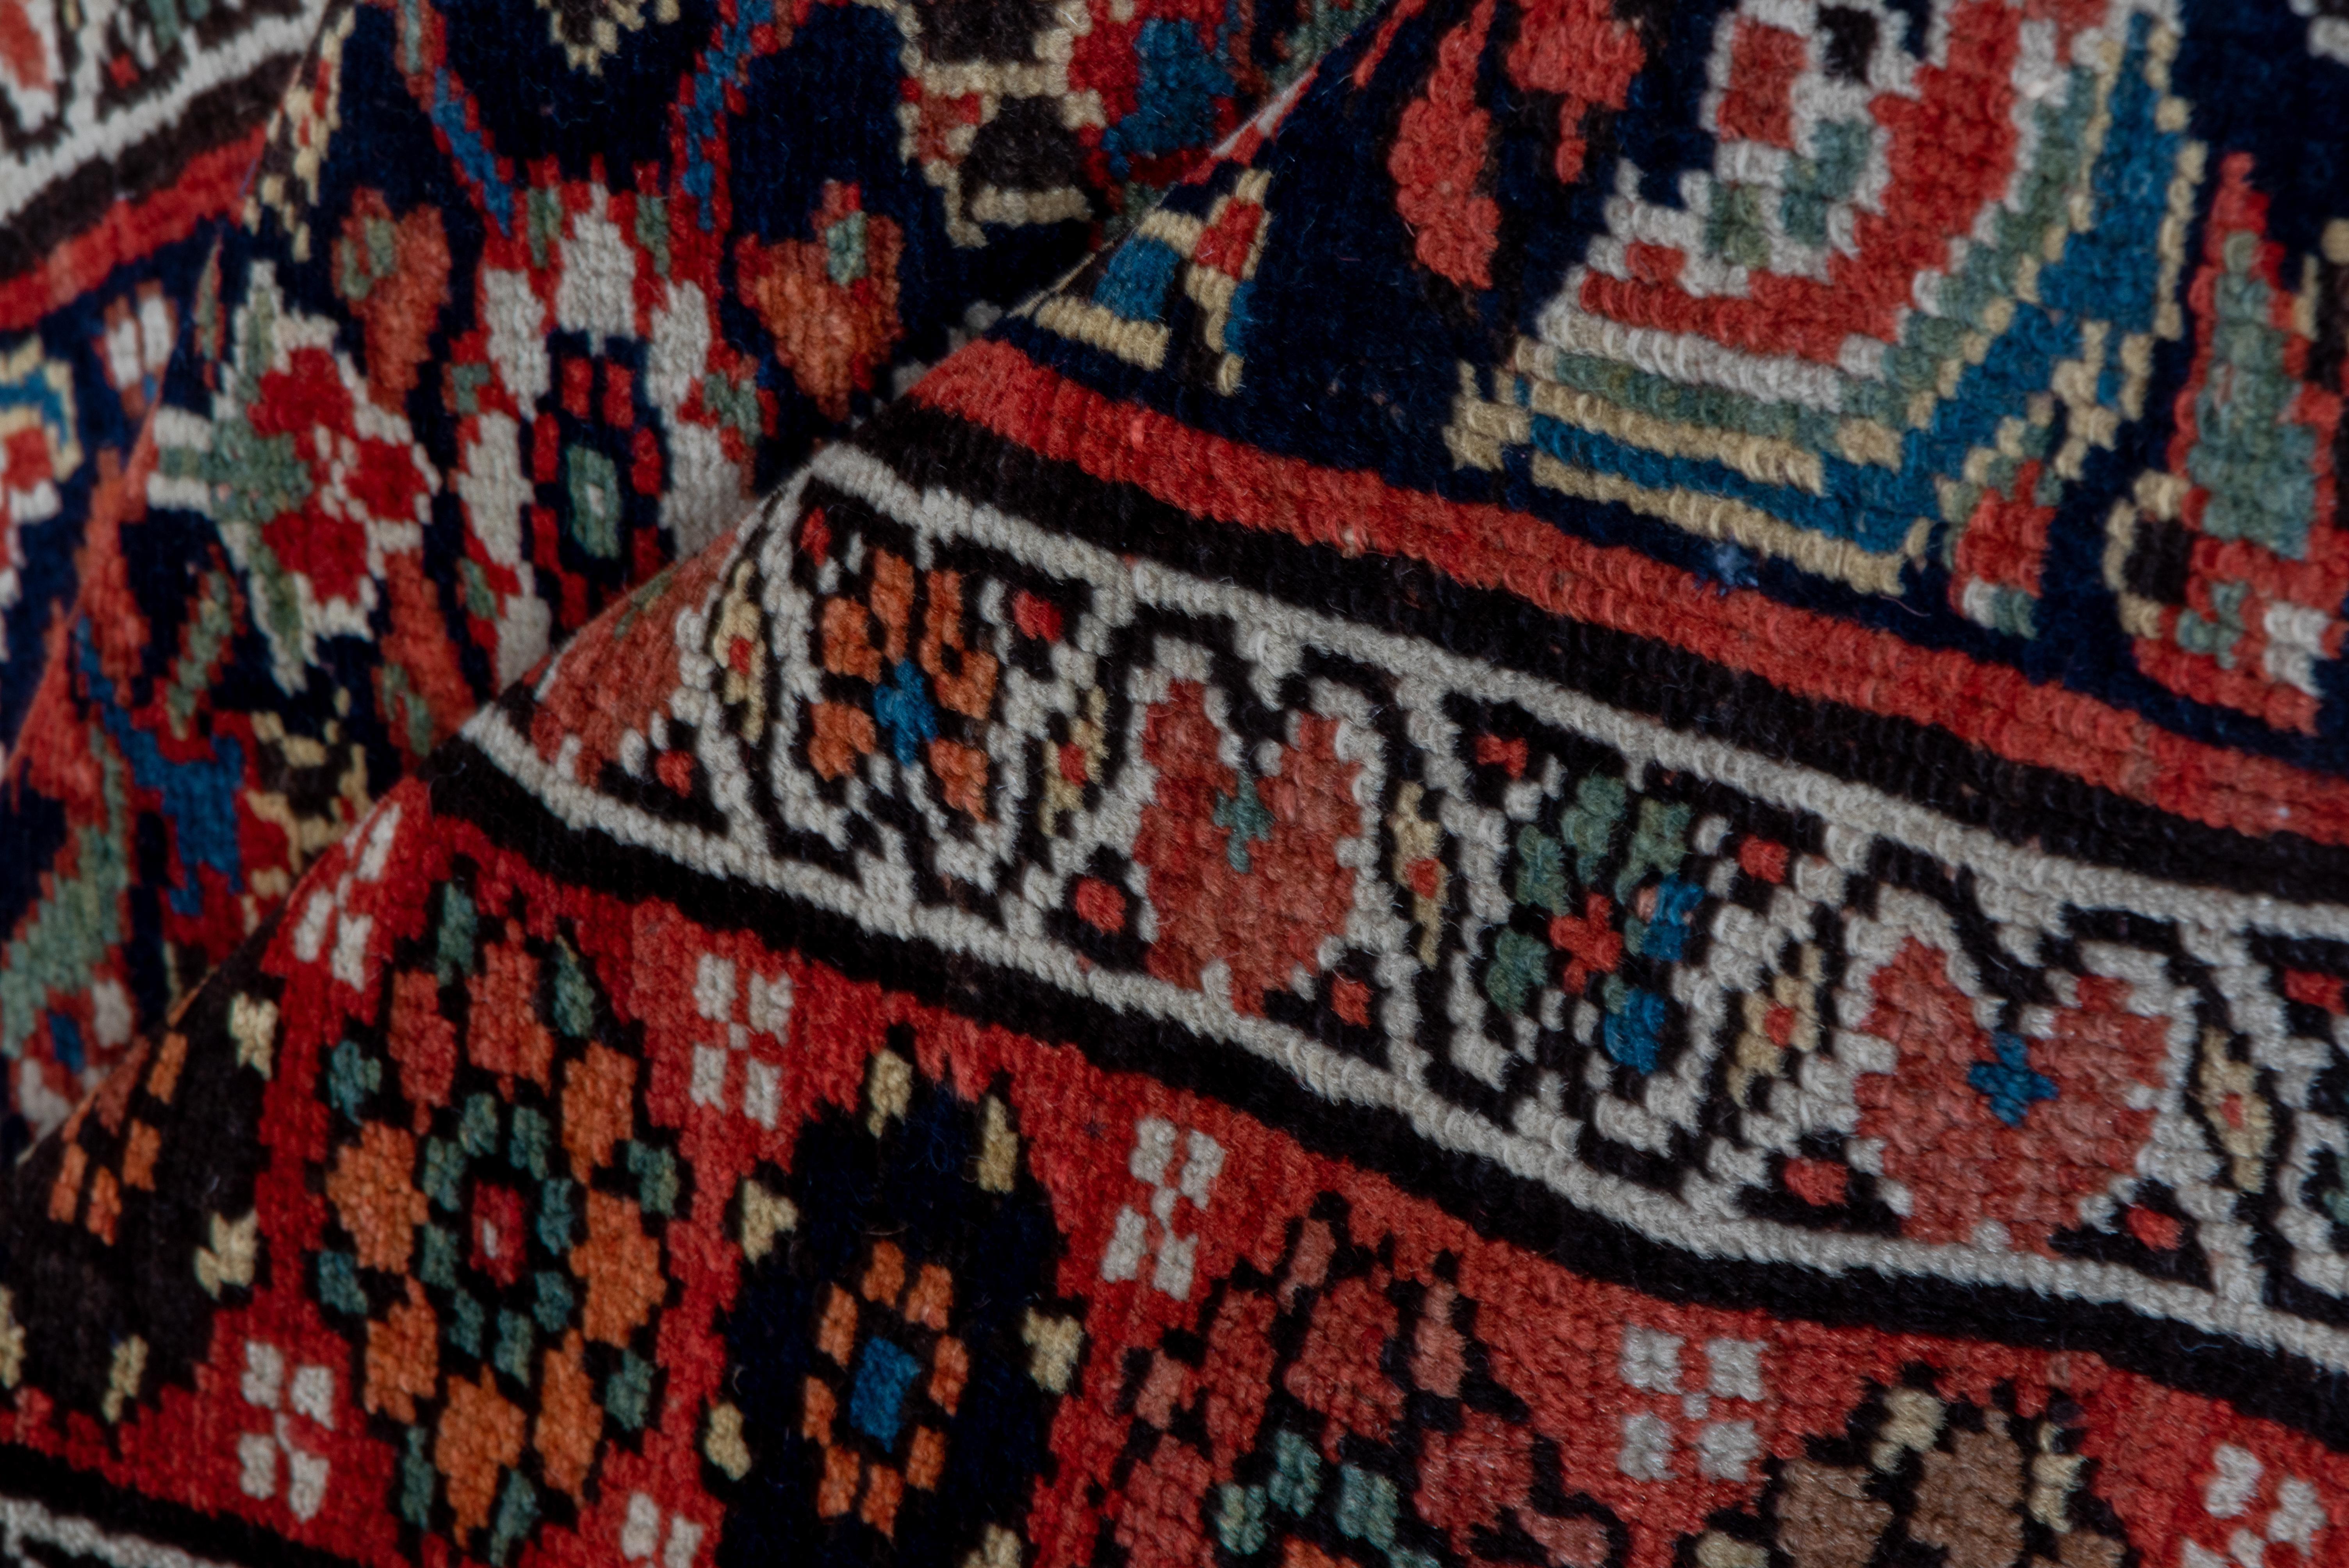 This west Persian, cotton foundation kenare (runner) shows a dark blue field displaying a single column Herati design with salient ecru rosettes. Red, rust, light blue and teal accents. Red main border with vary coloured rosettes and attendant off